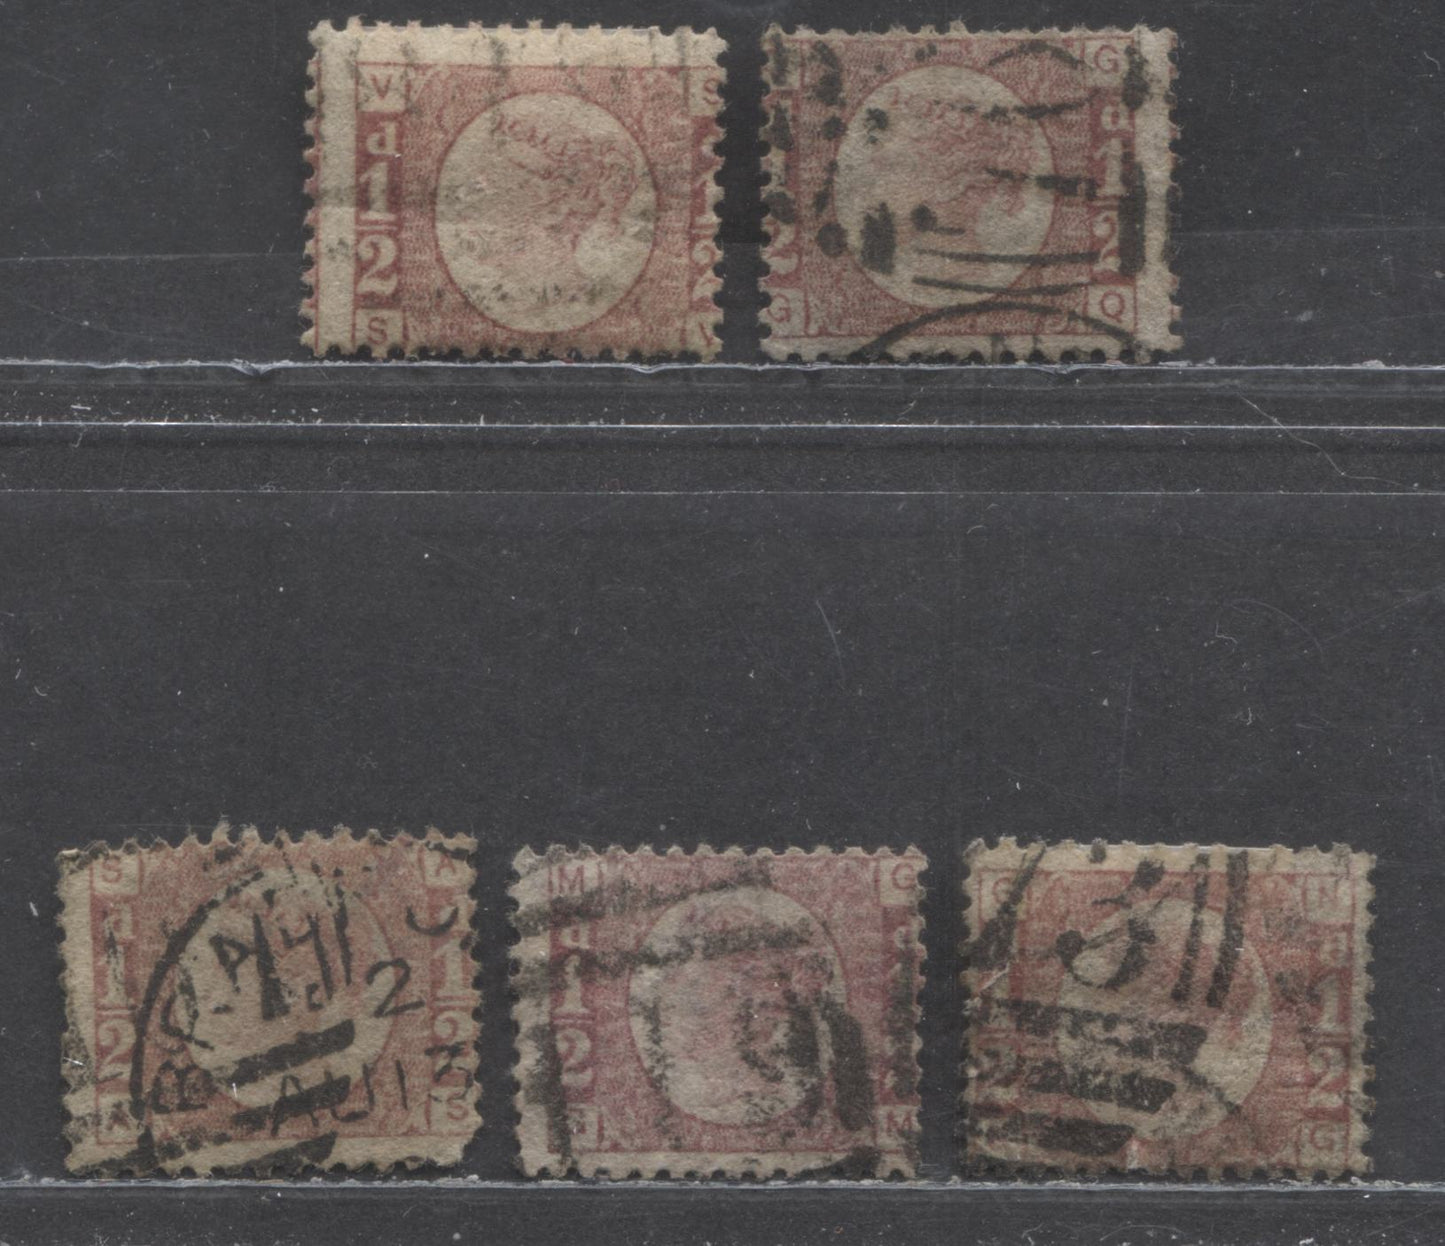 Lot 22 Great Britain SC#58 (SG#48) 1/2d Rose Red 1870 - 1880 Bantam Issue, Plate 4,5,8,8,11,12 Printings, 5 Good Used Examples, Click on Listing to See ALL Pictures, Estimated Value $32